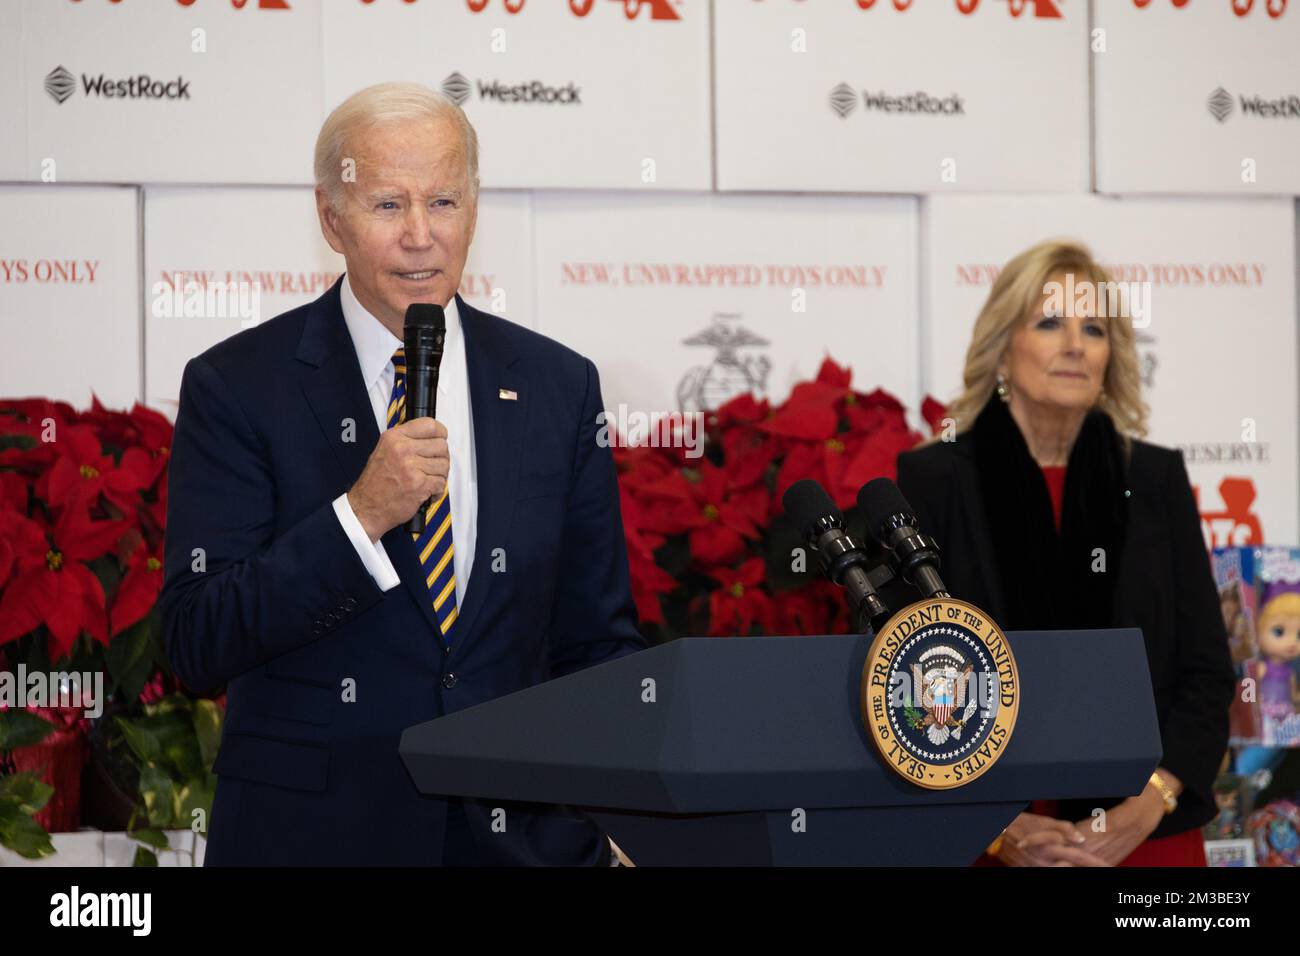 Arlington, United States. 12 December, 2022. U.S. President Joe Biden delivers remarks as First Lady Jill Biden, right, looks on during the 75th anniversary Toys for Tots sorting at Joint Base Myer-Henderson Hall, December 12, 2022 in Arlington, Virginia.  Credit: Sgt. Ellen Schaaf/US Marine Corps/Alamy Live News Stock Photo